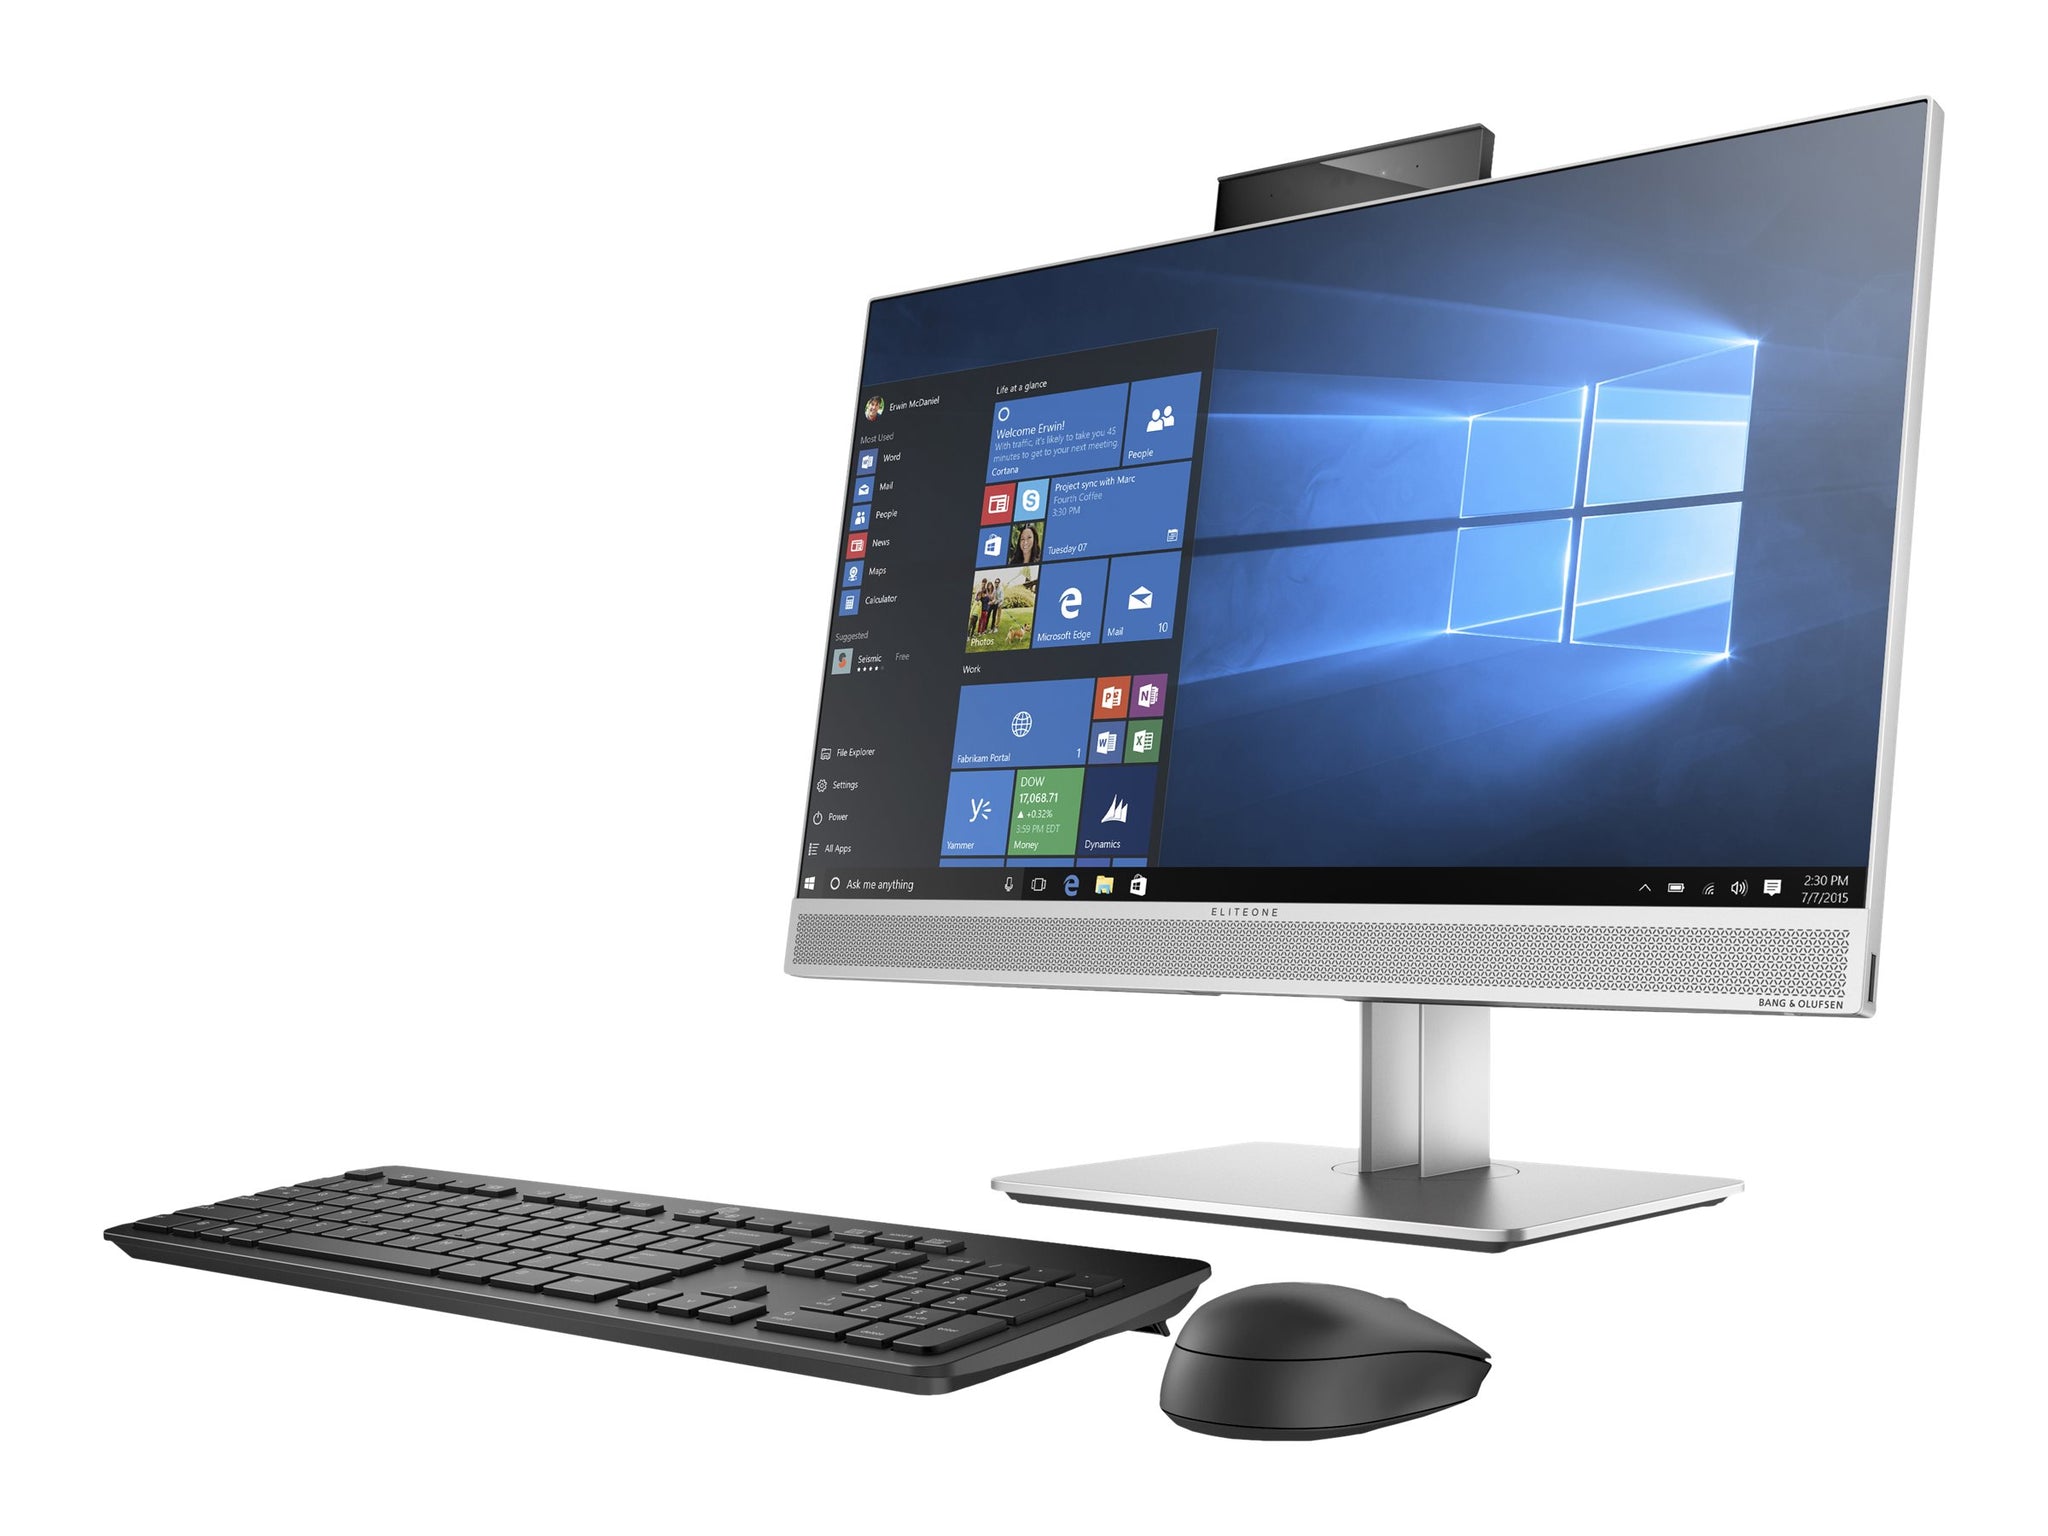 HP EliteDesk 800 G4 23.8-inch NonTouch All-in-One PC - I5-8500 8GB 256GB M.2 W10P Refurbished